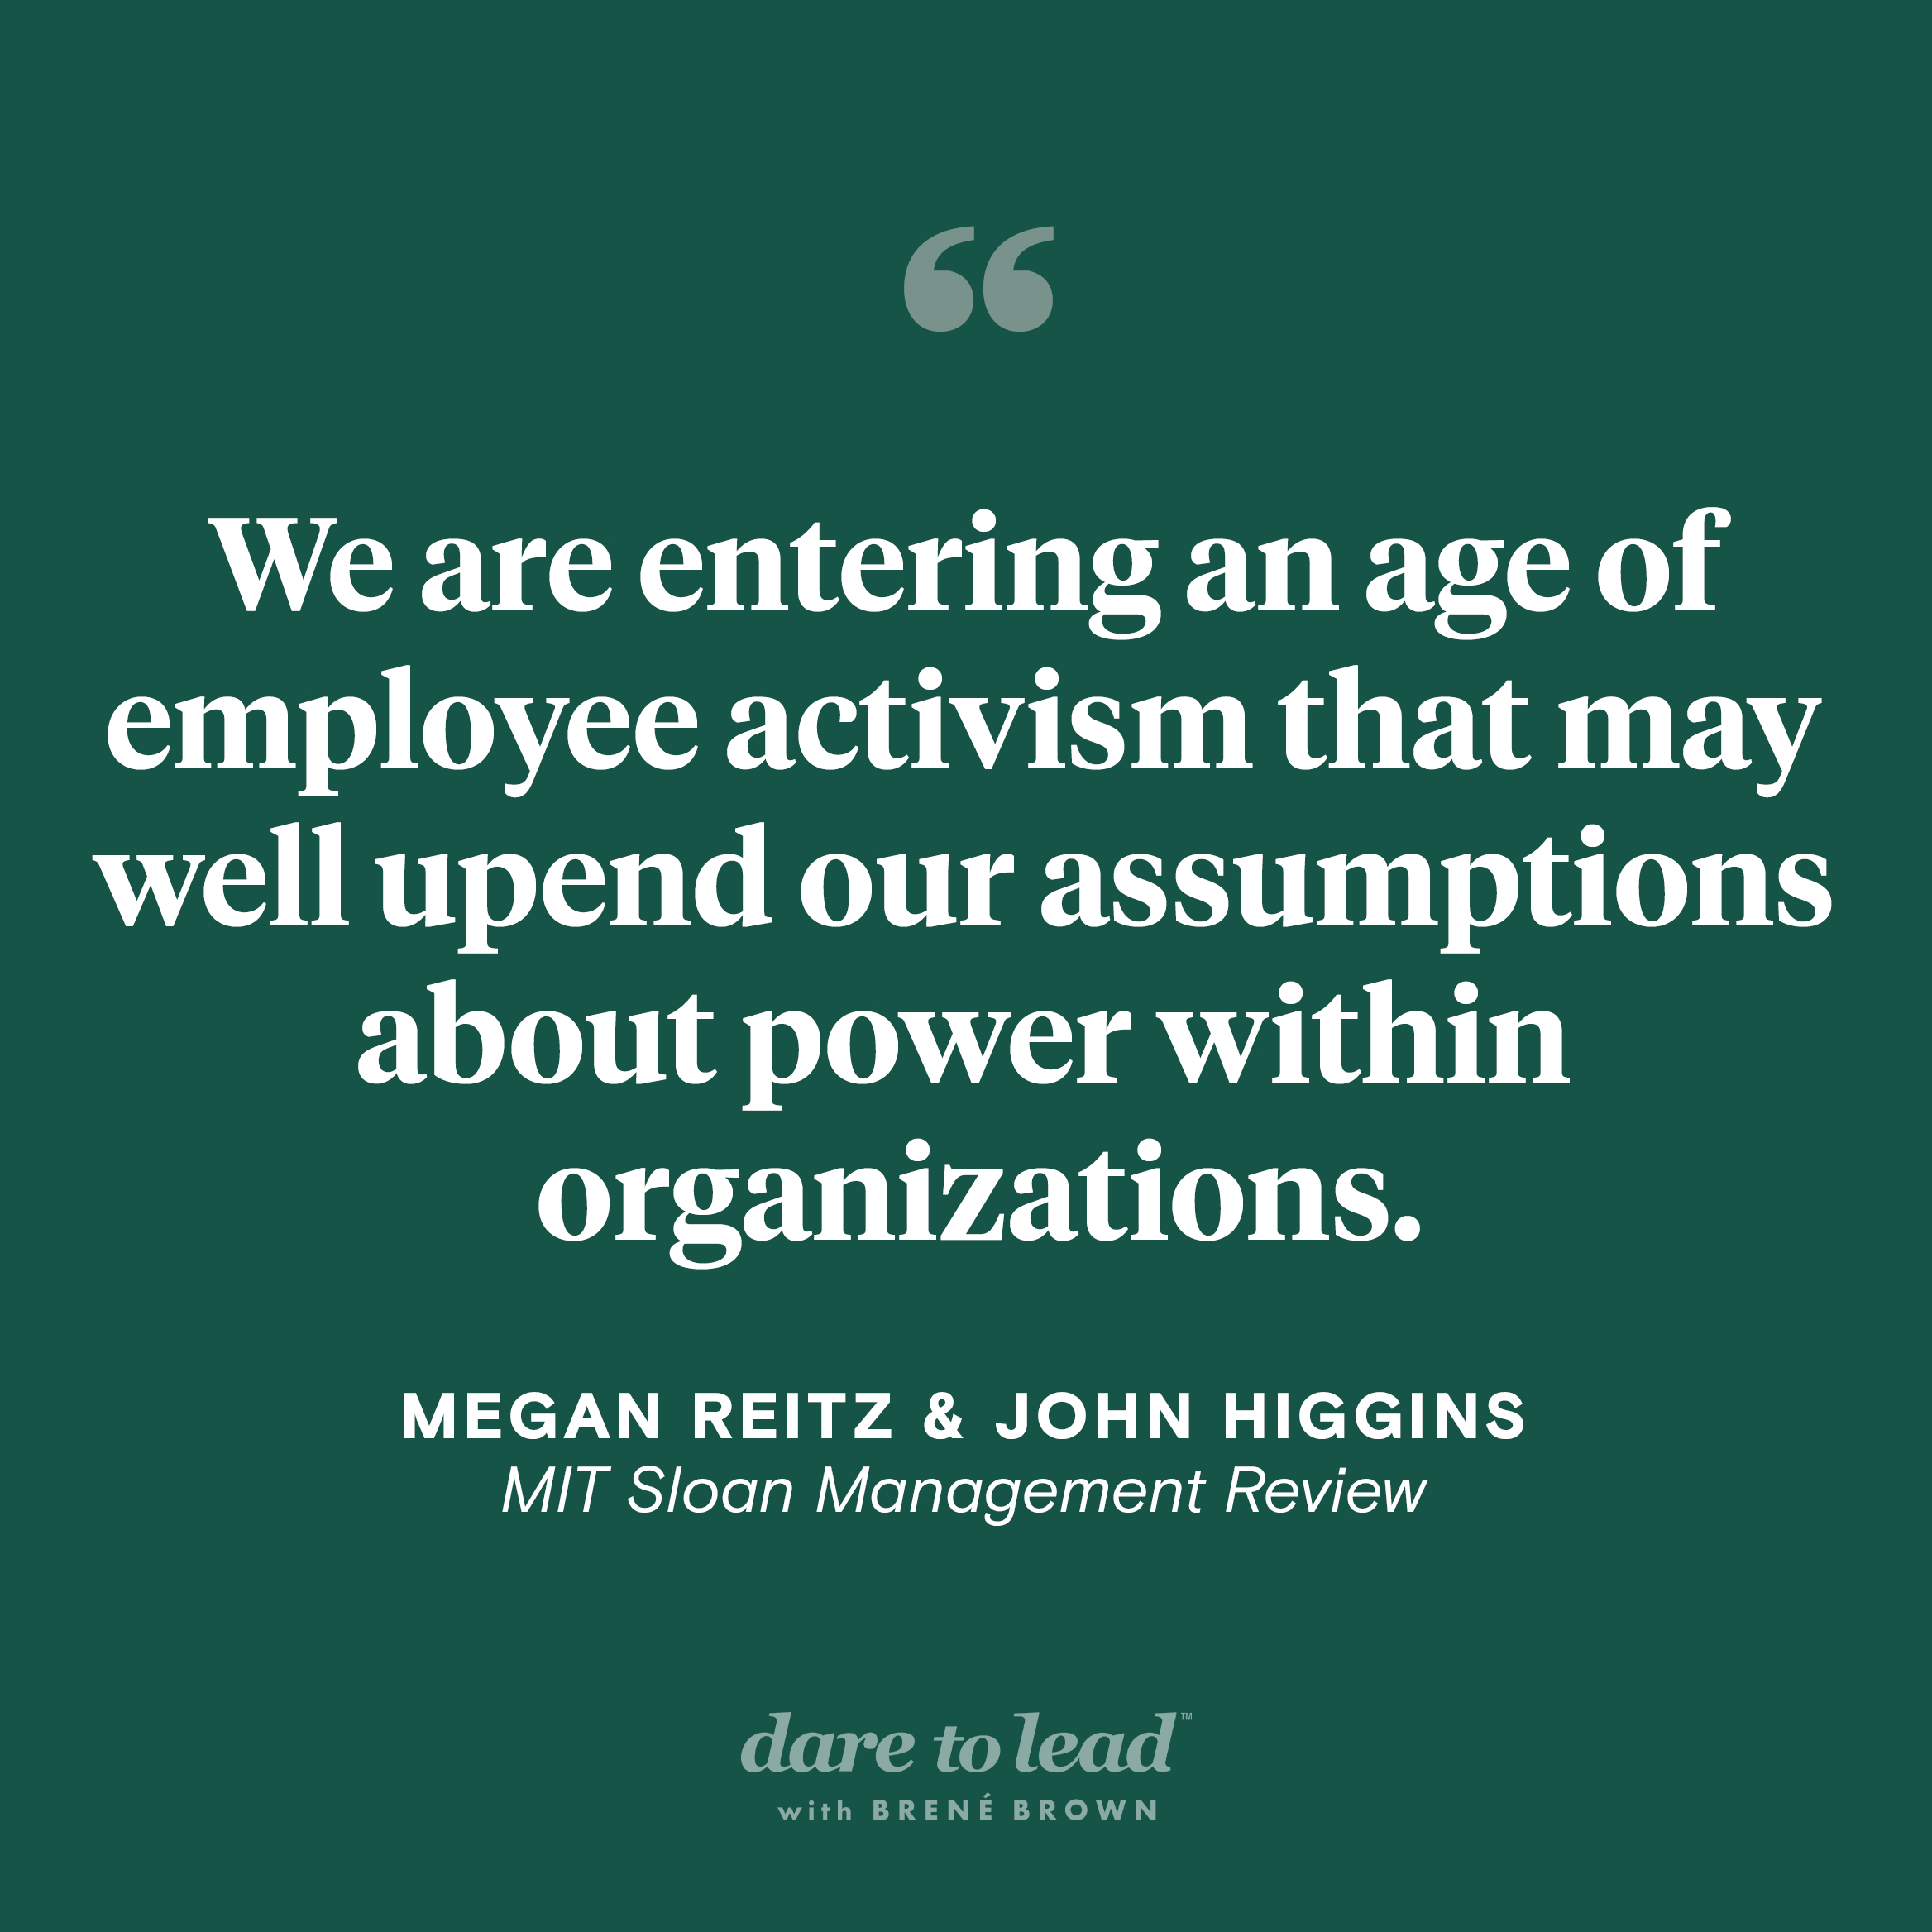 A quote from an article by Megan Reitz and John Higgins, published in the MIT Sloan Management Review: We are entering an age of employee activism that may well upend our assumptions about power within organizations.